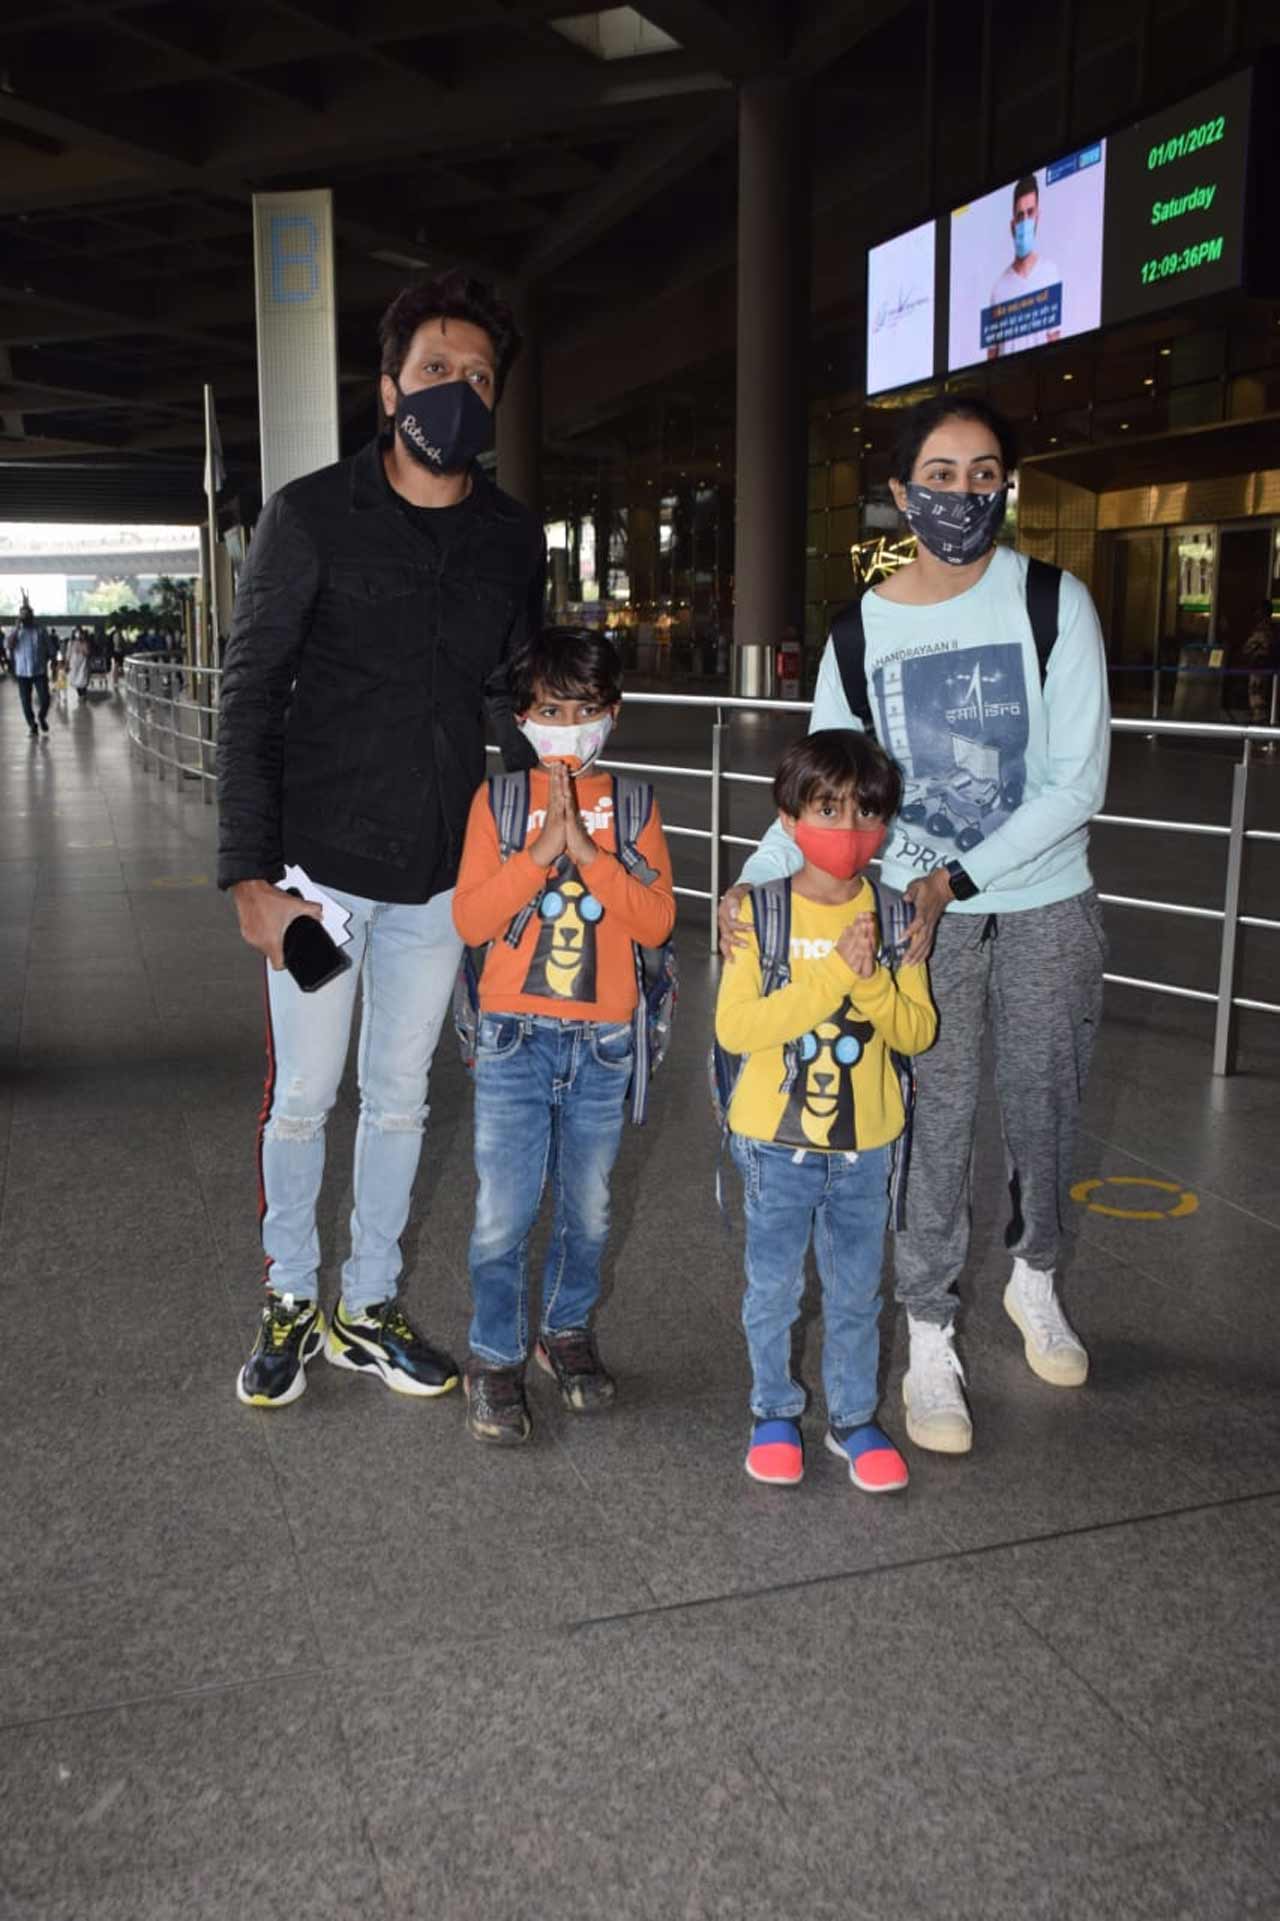 Riteish Deshmukh and his wife Genelia were snapped together with their kids at the Mumbai airport. The adorable duo was snapped doing namaste to the paparazzi, and they were caught off guard greeting the shutterbugs.